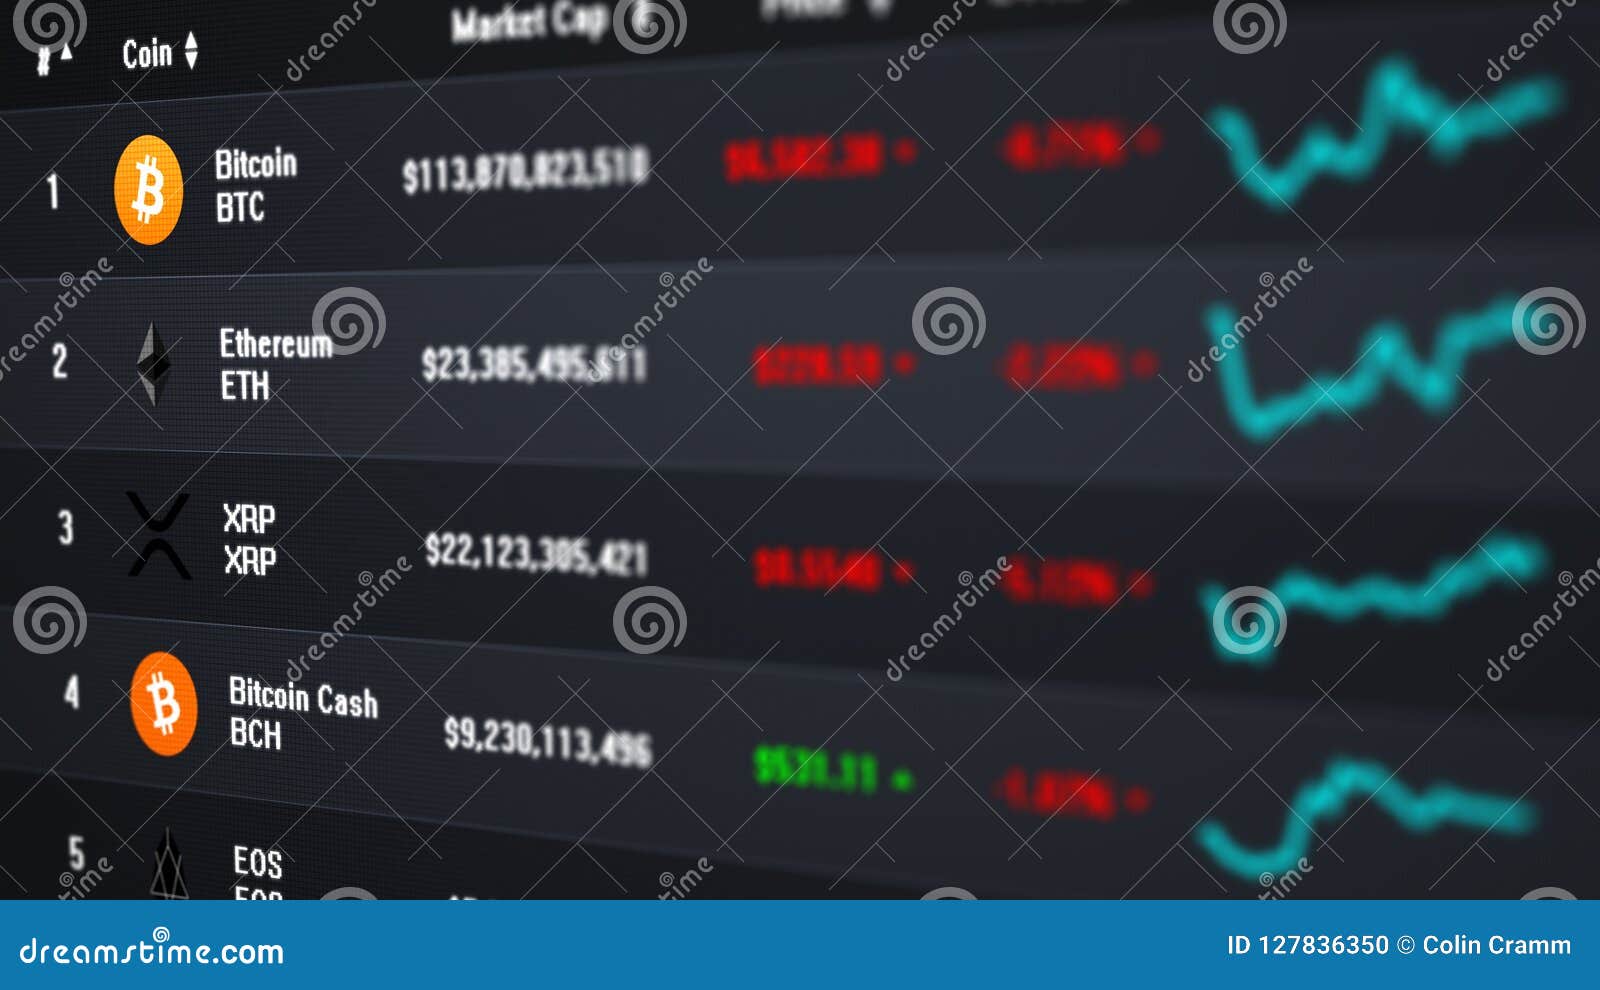 rates of all cryptocurrency